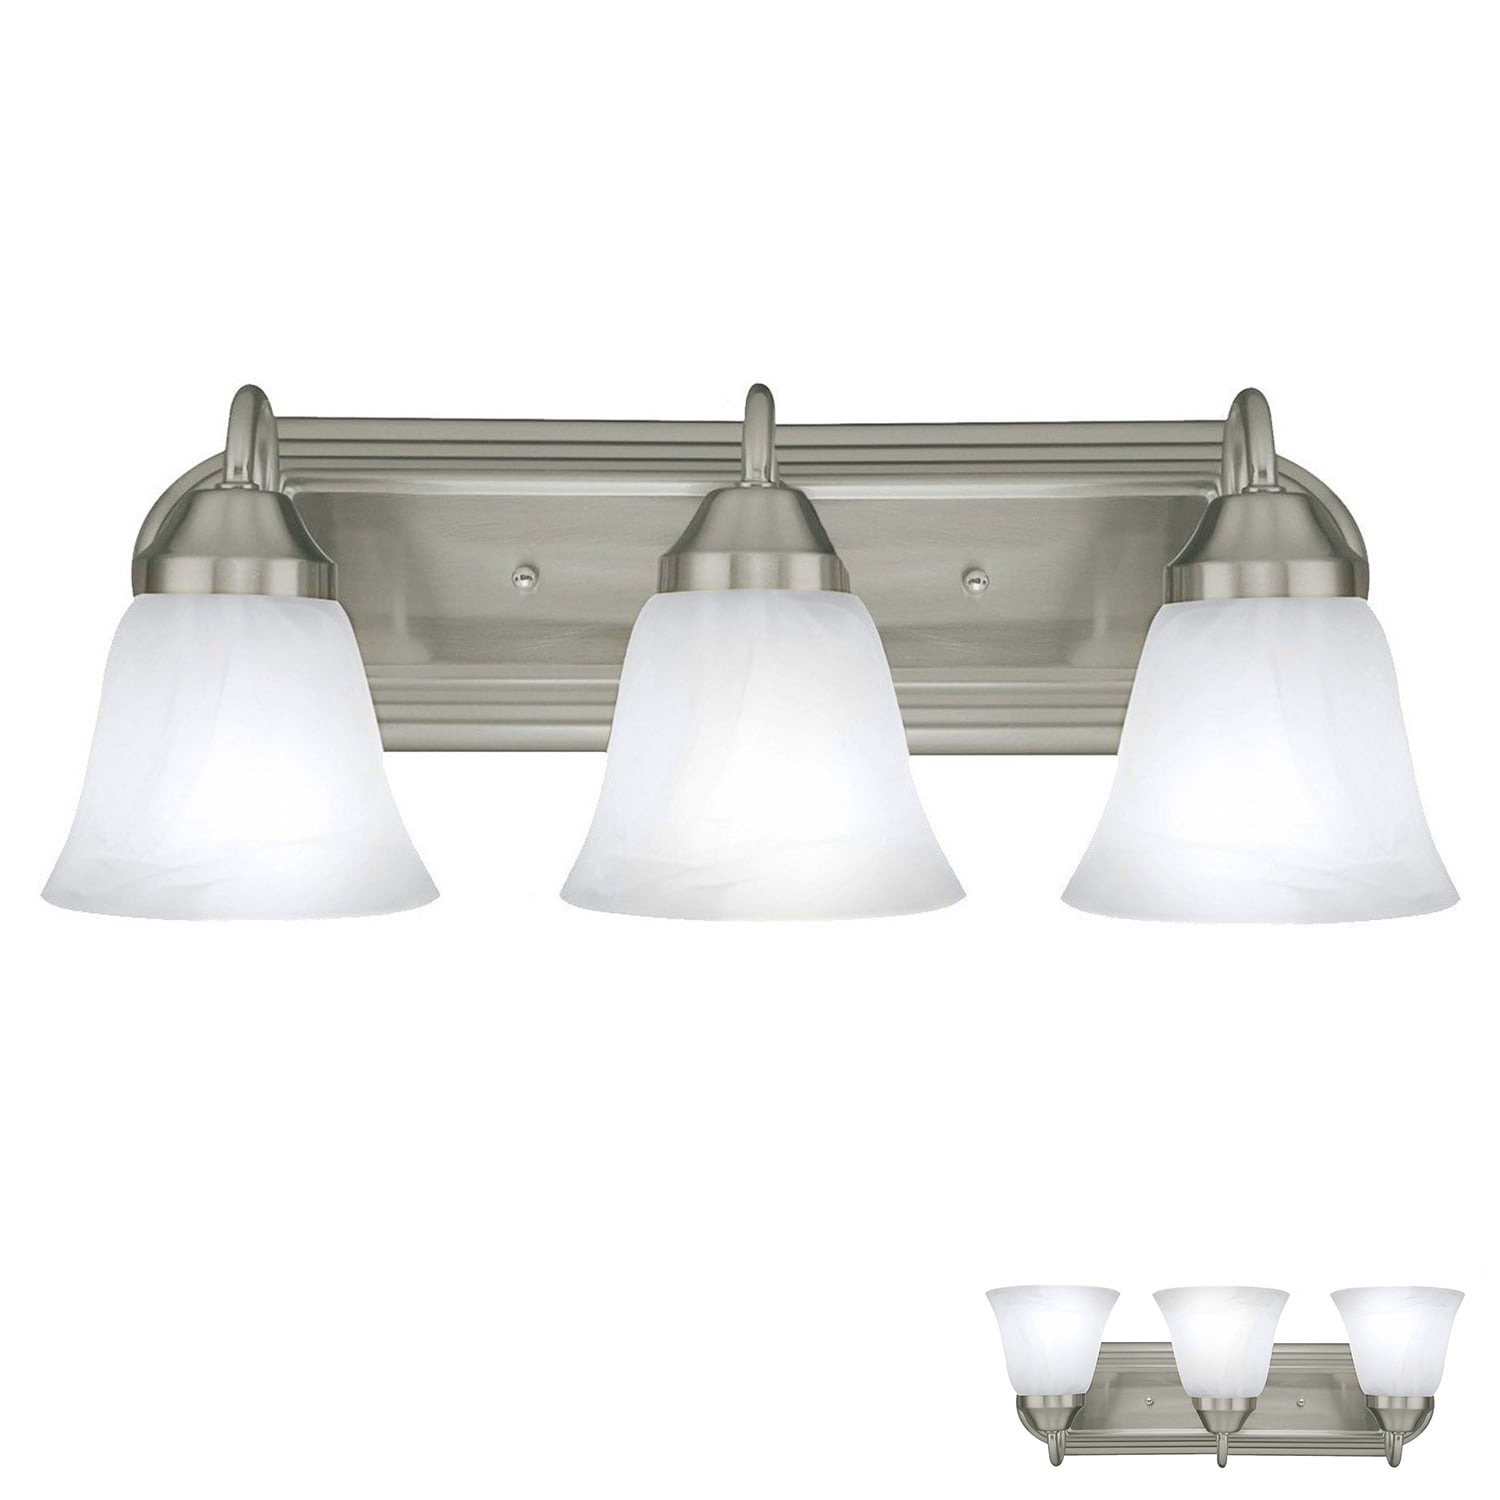 Details about   Progress Lighting Three-Light Bath Fixture with White Washed Alabaster Style Gla 